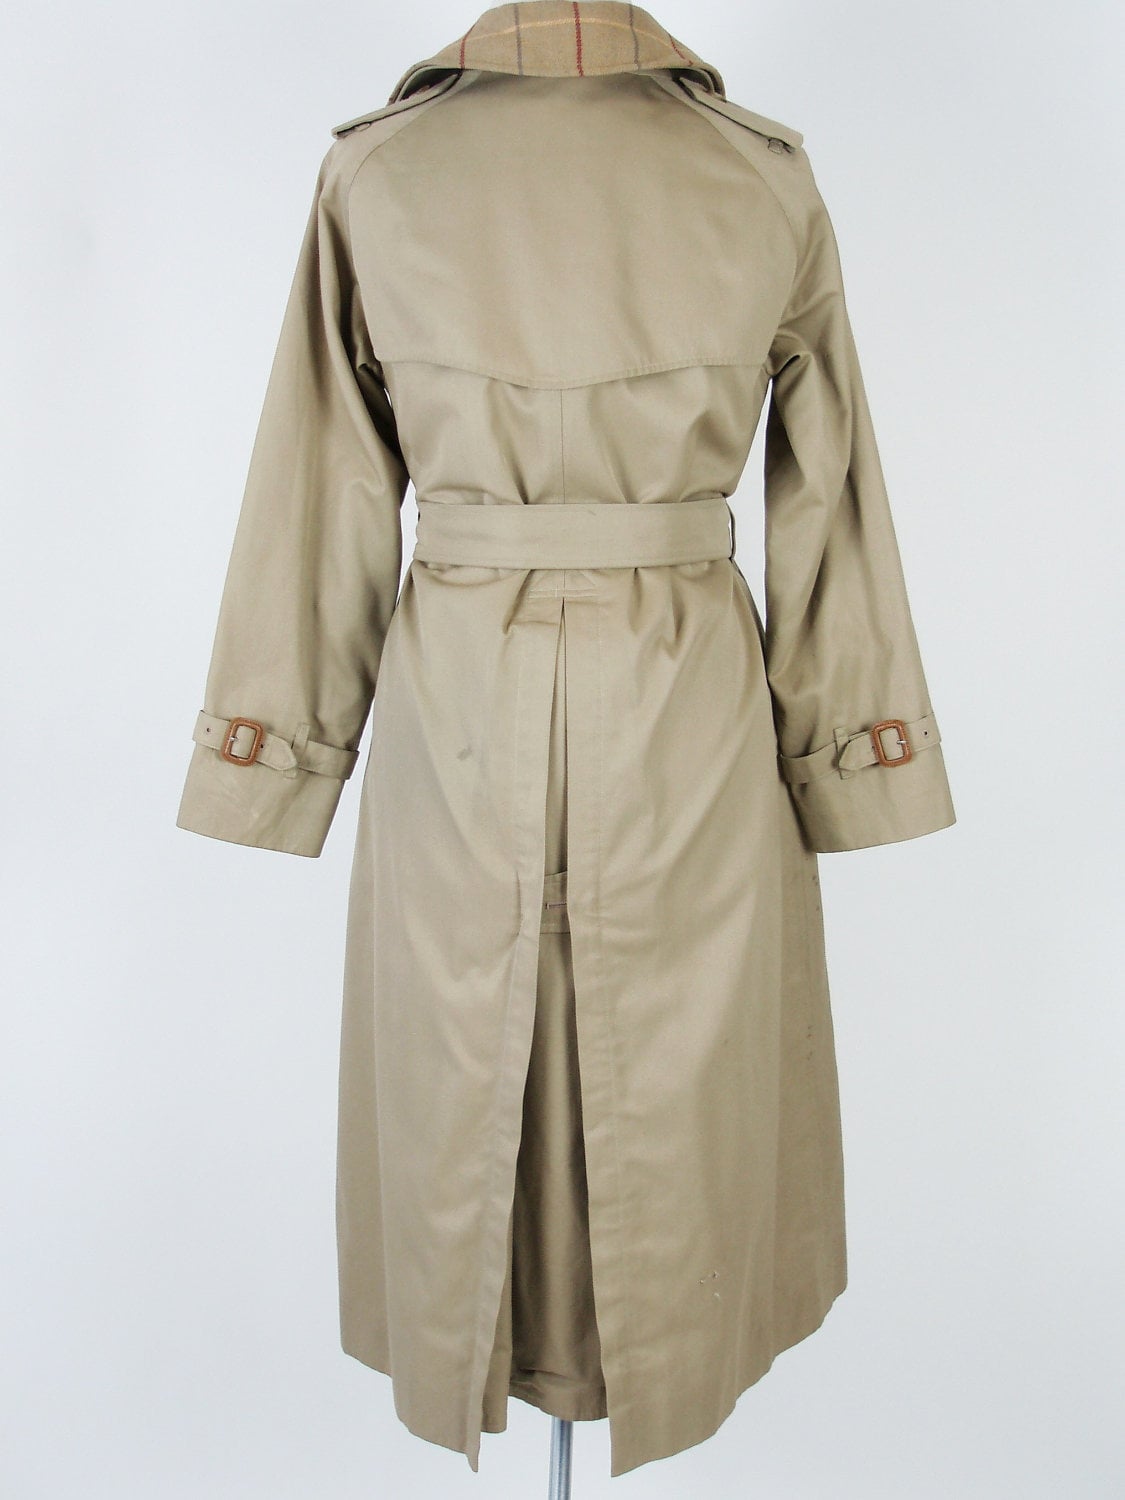 Vintage 1980s Burberry's trench coat mac size 12